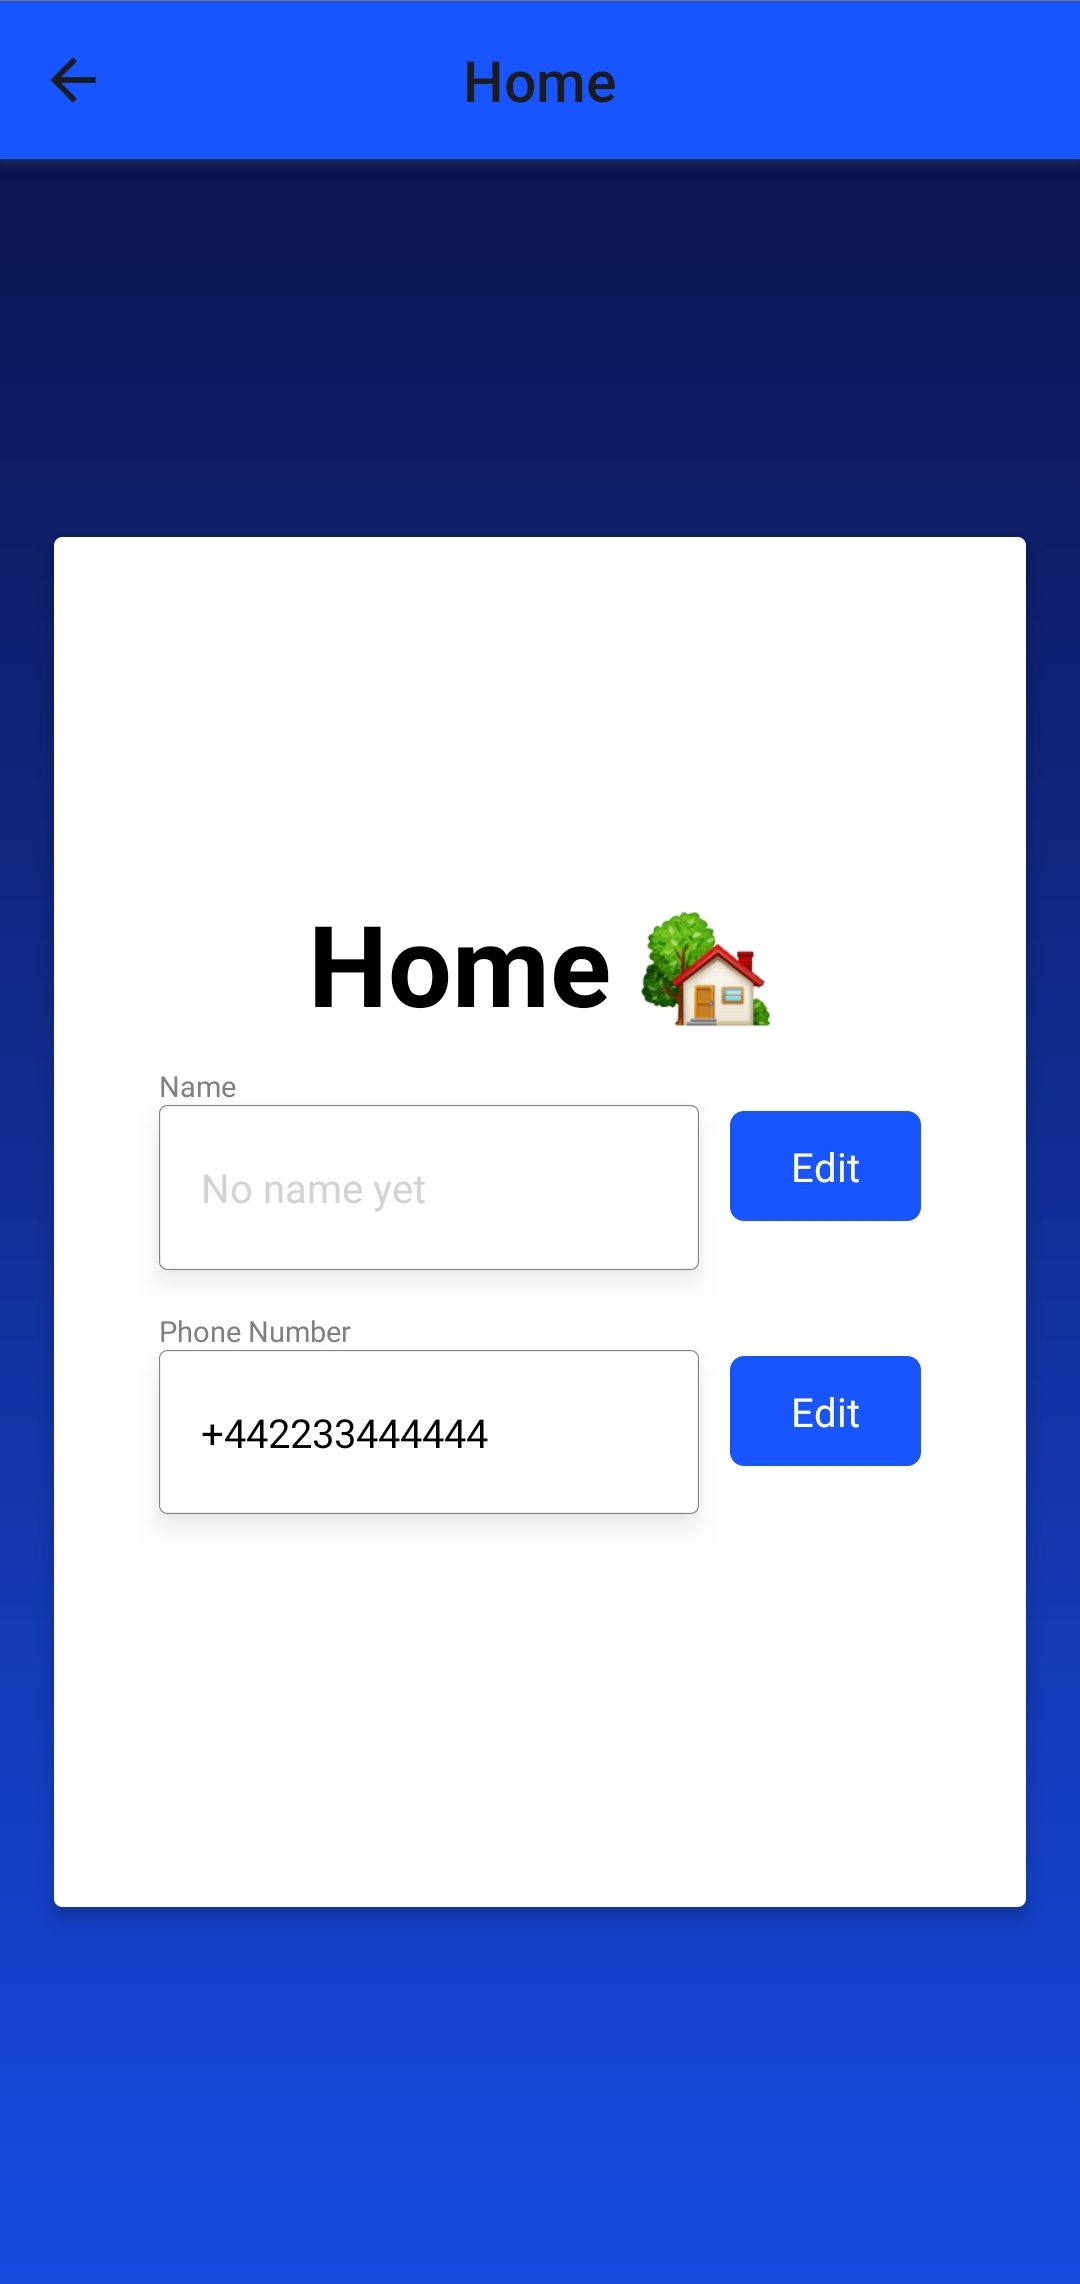 A screenshot of a mobile device running the demo tru.ID application. The background is blue with a white card over the top. On this card is an image of an animated house with the label 'Home'. There are also two text input fields, 'name' and 'phoneNumber'. To the right of each of these is an 'Edit' button.